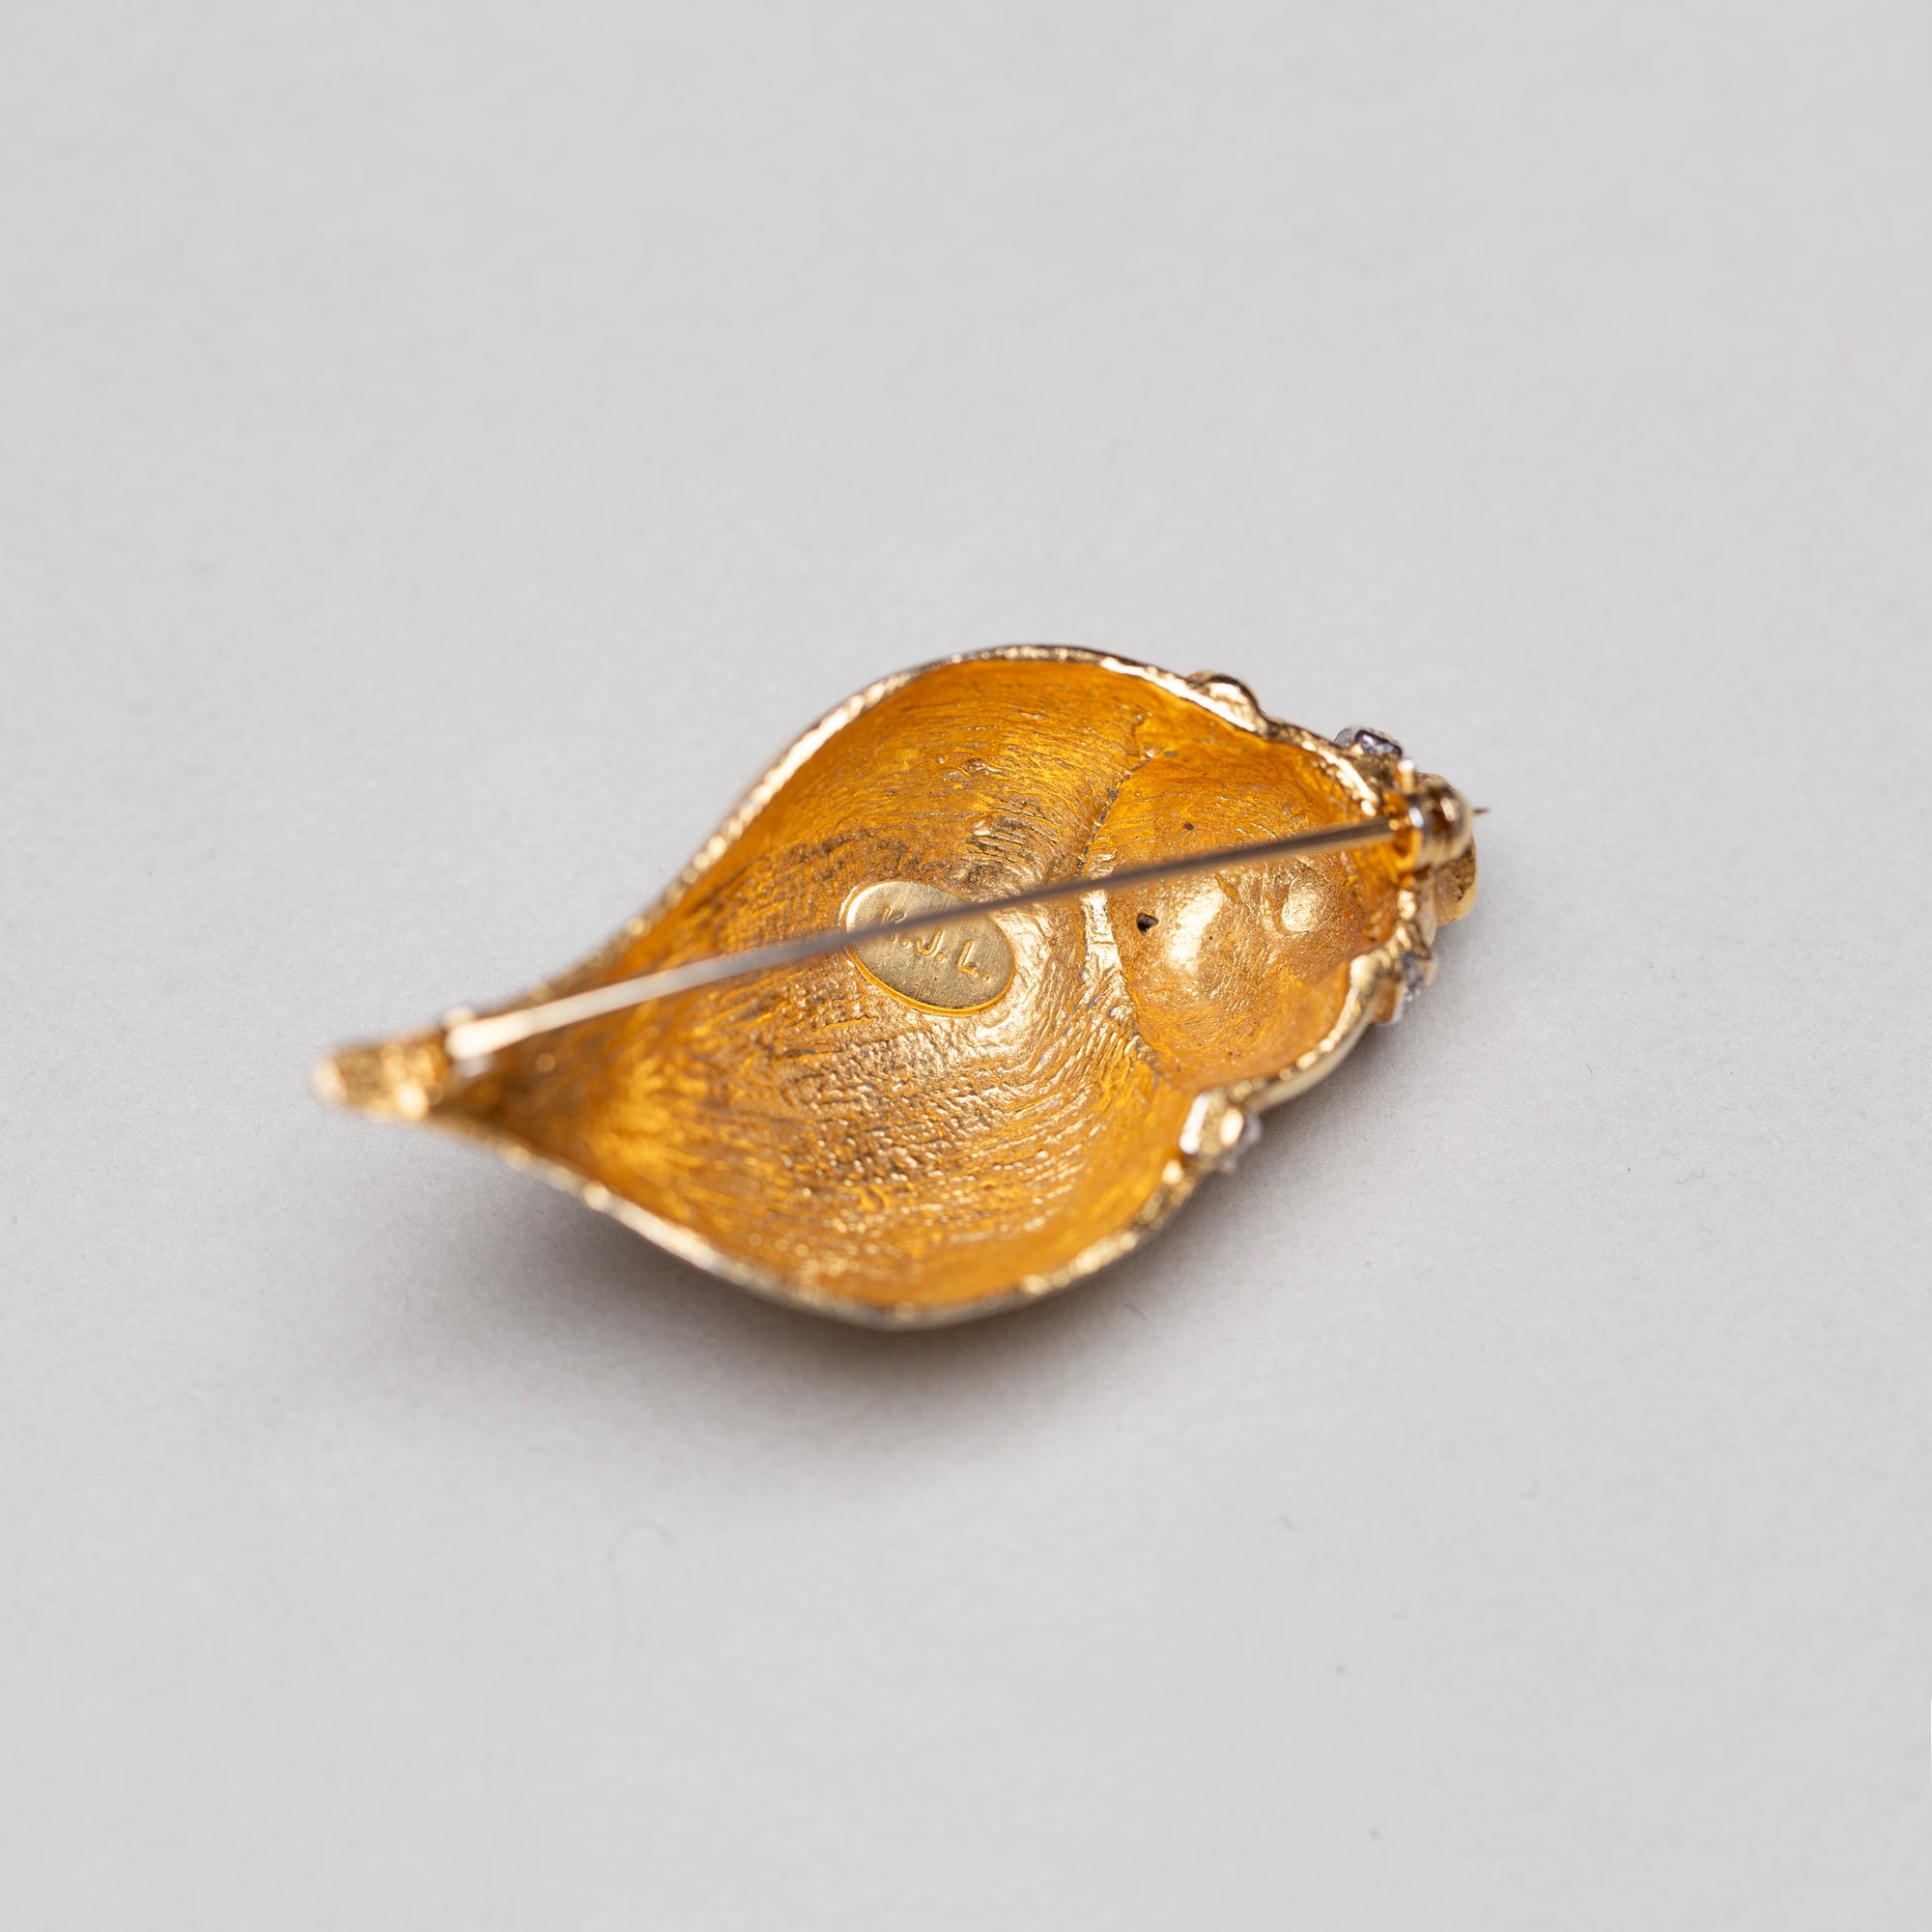 Vintage Gold Conch Shell Pendant Brooch